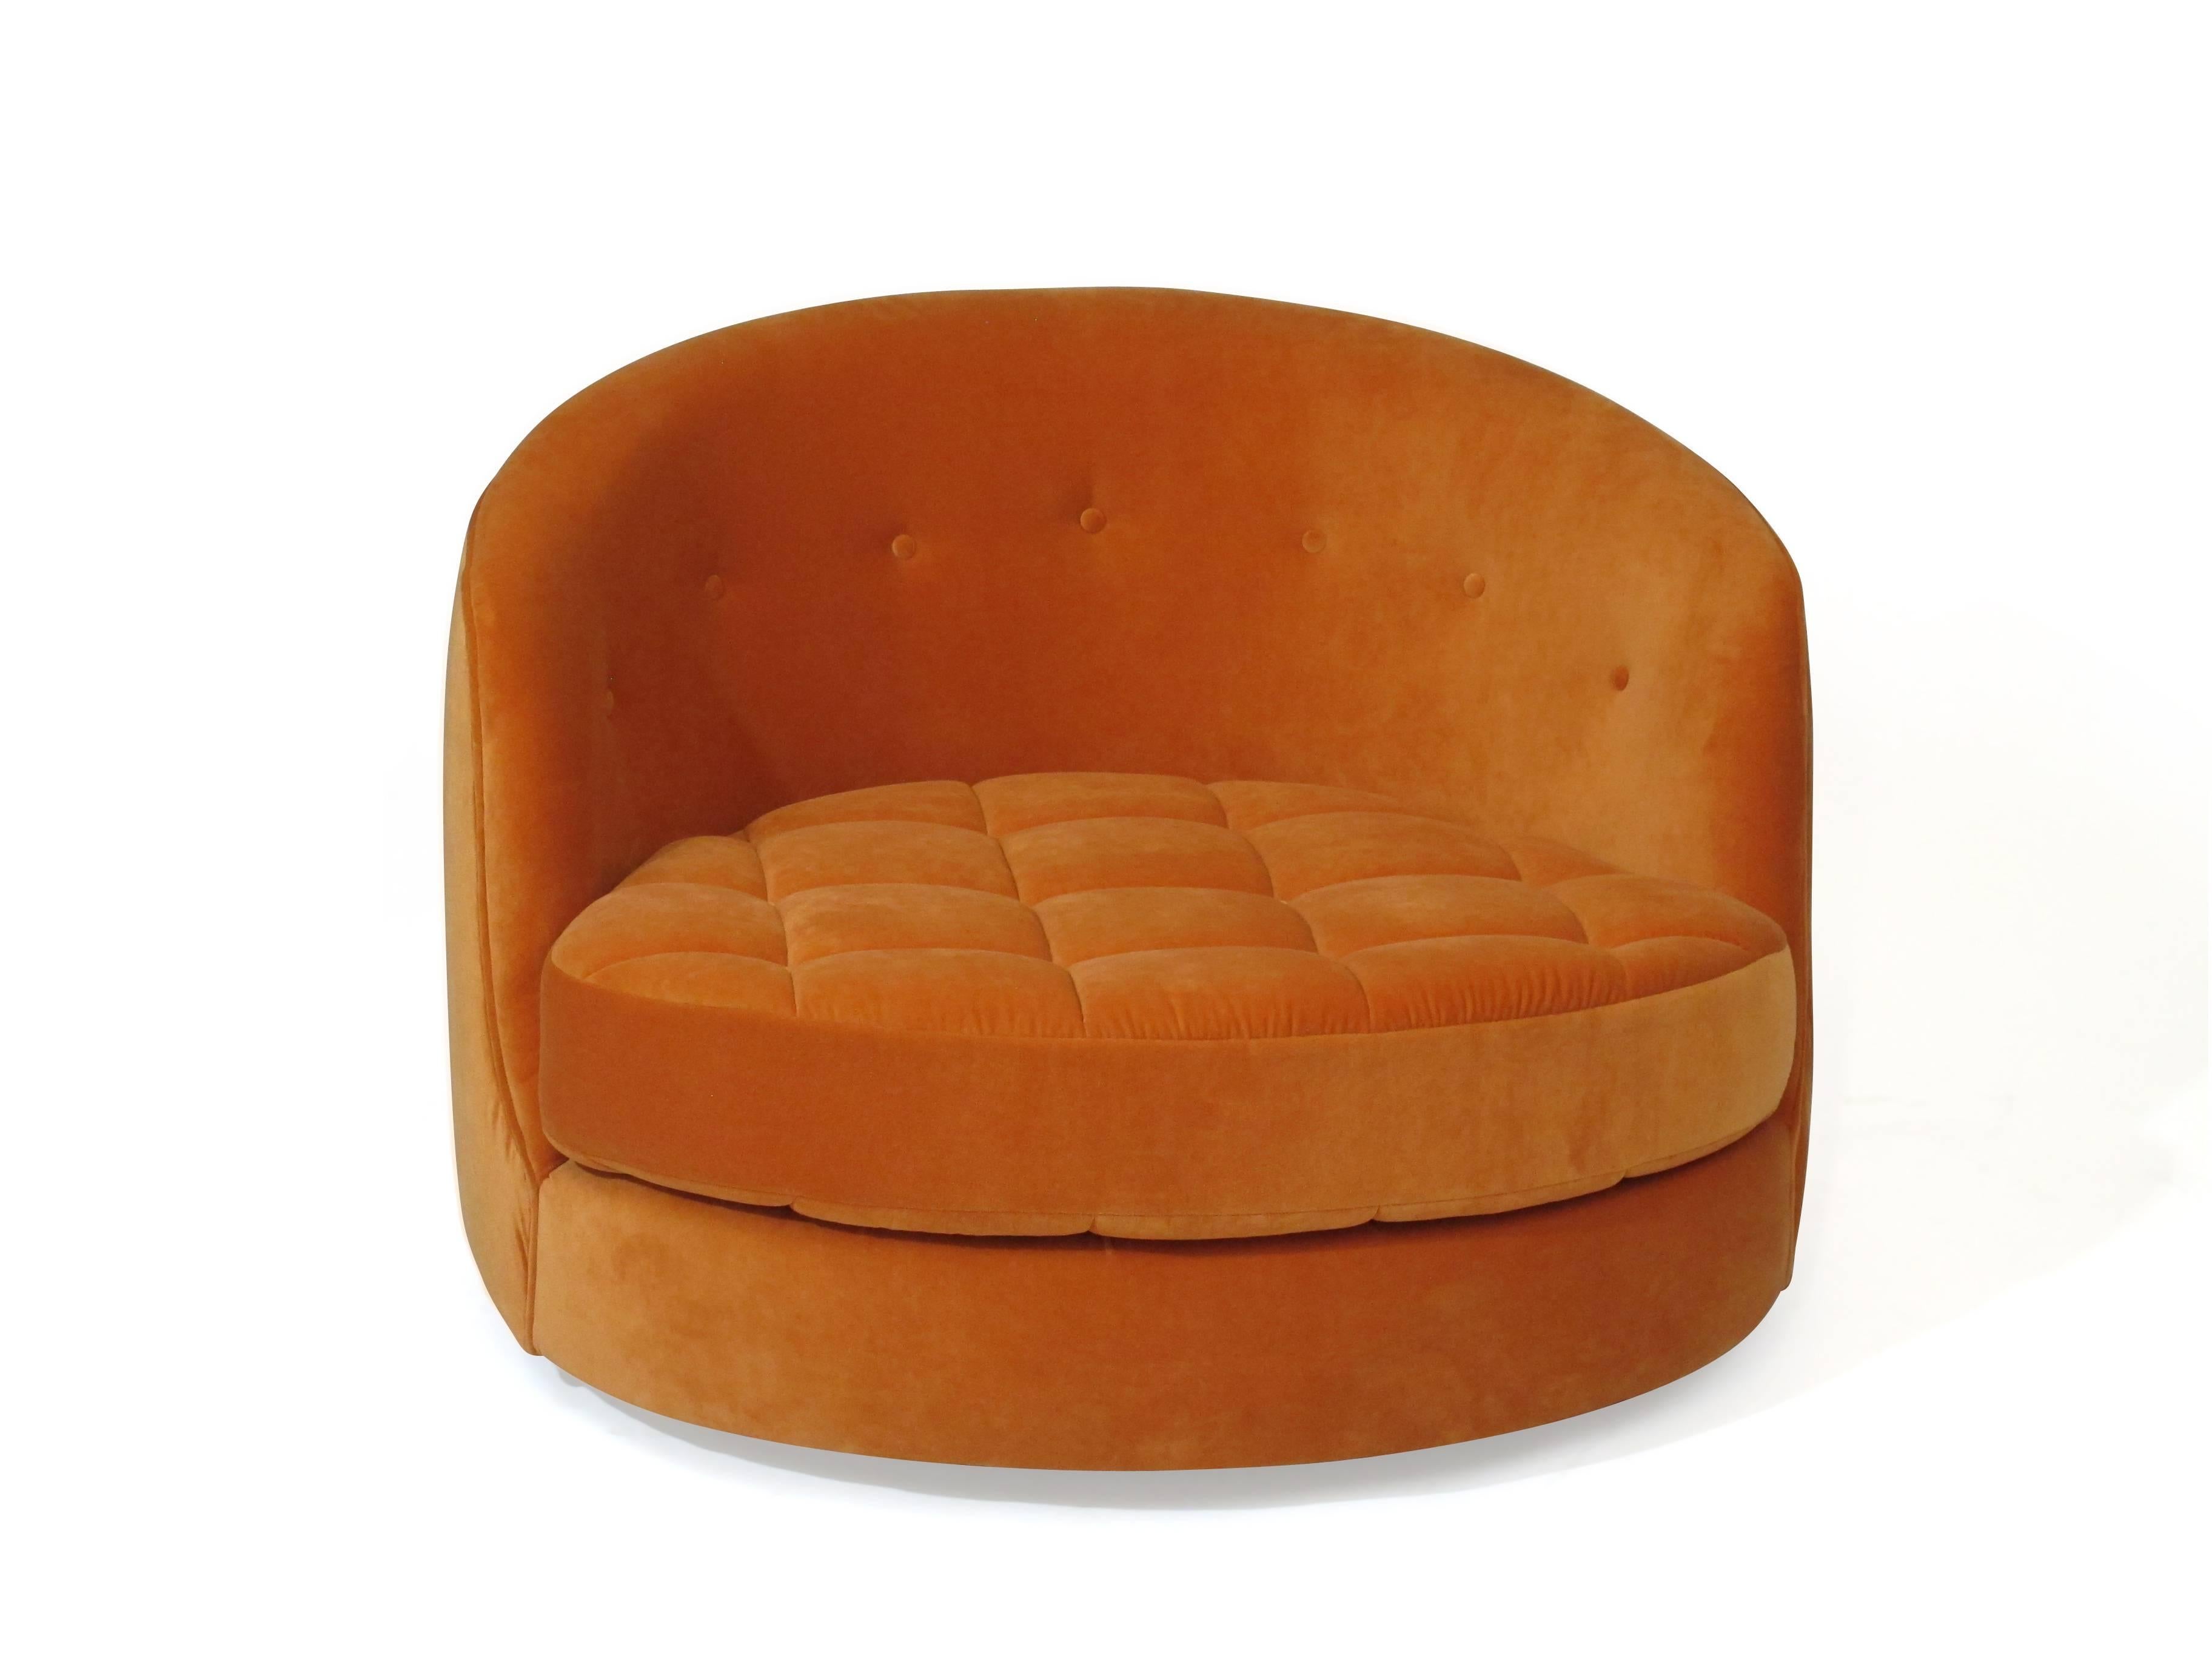 Fabric Milo Baughman for Thayer Coggin Swivel Tub Chair Available in COM